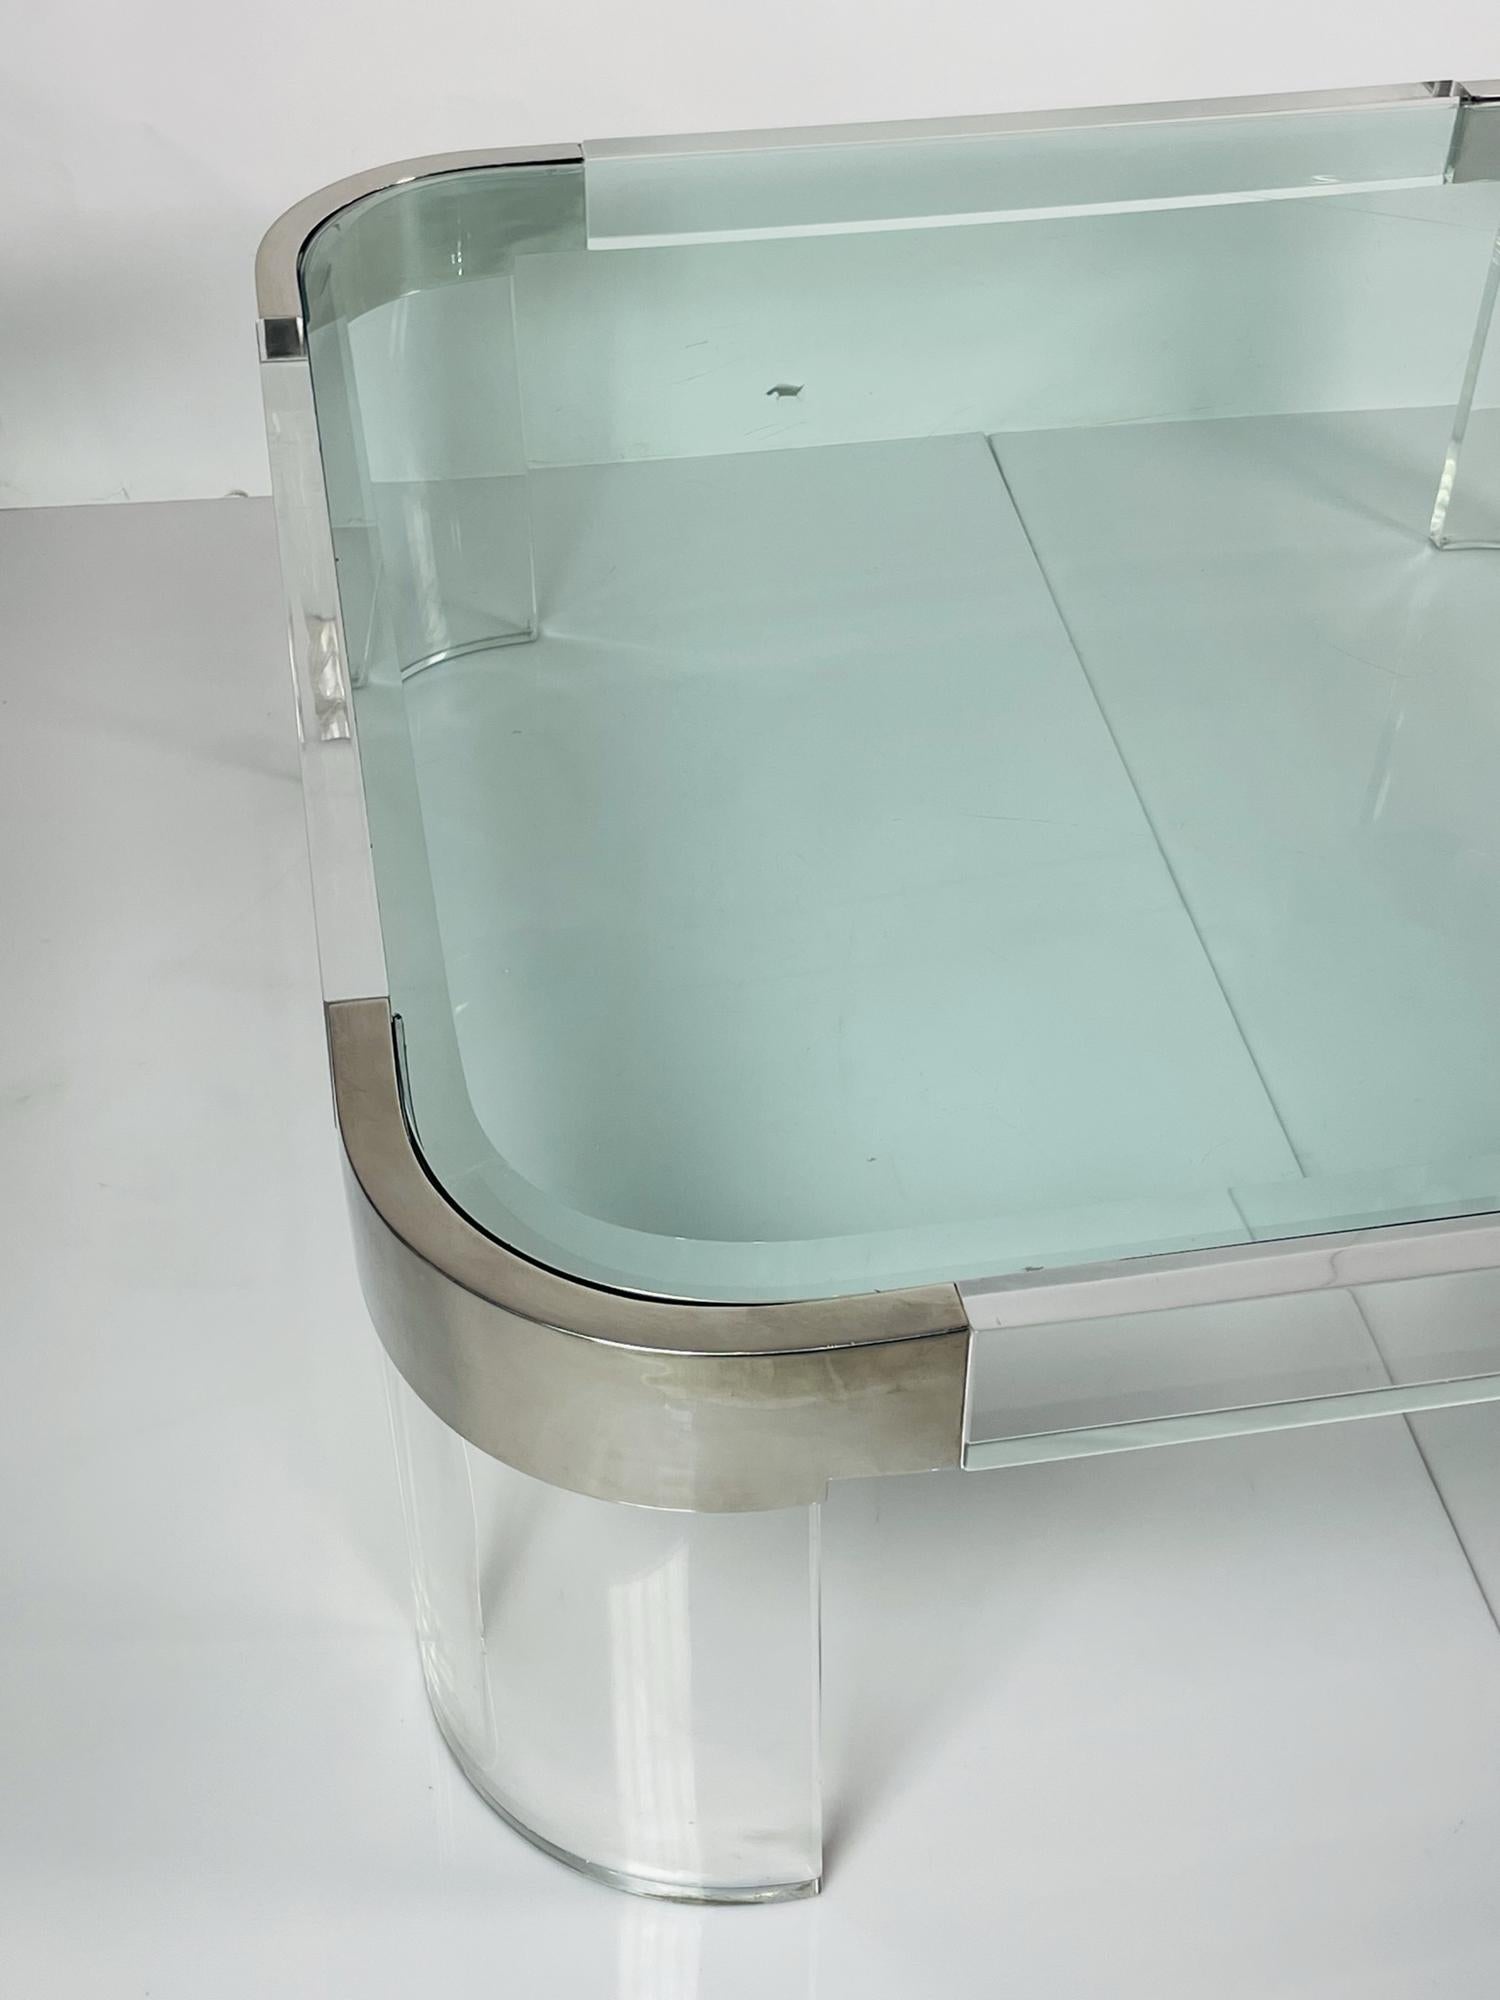 Charles Hollis Jones Waterfall Coffee Table in Lucite, Glass & Polished Nickel For Sale 2